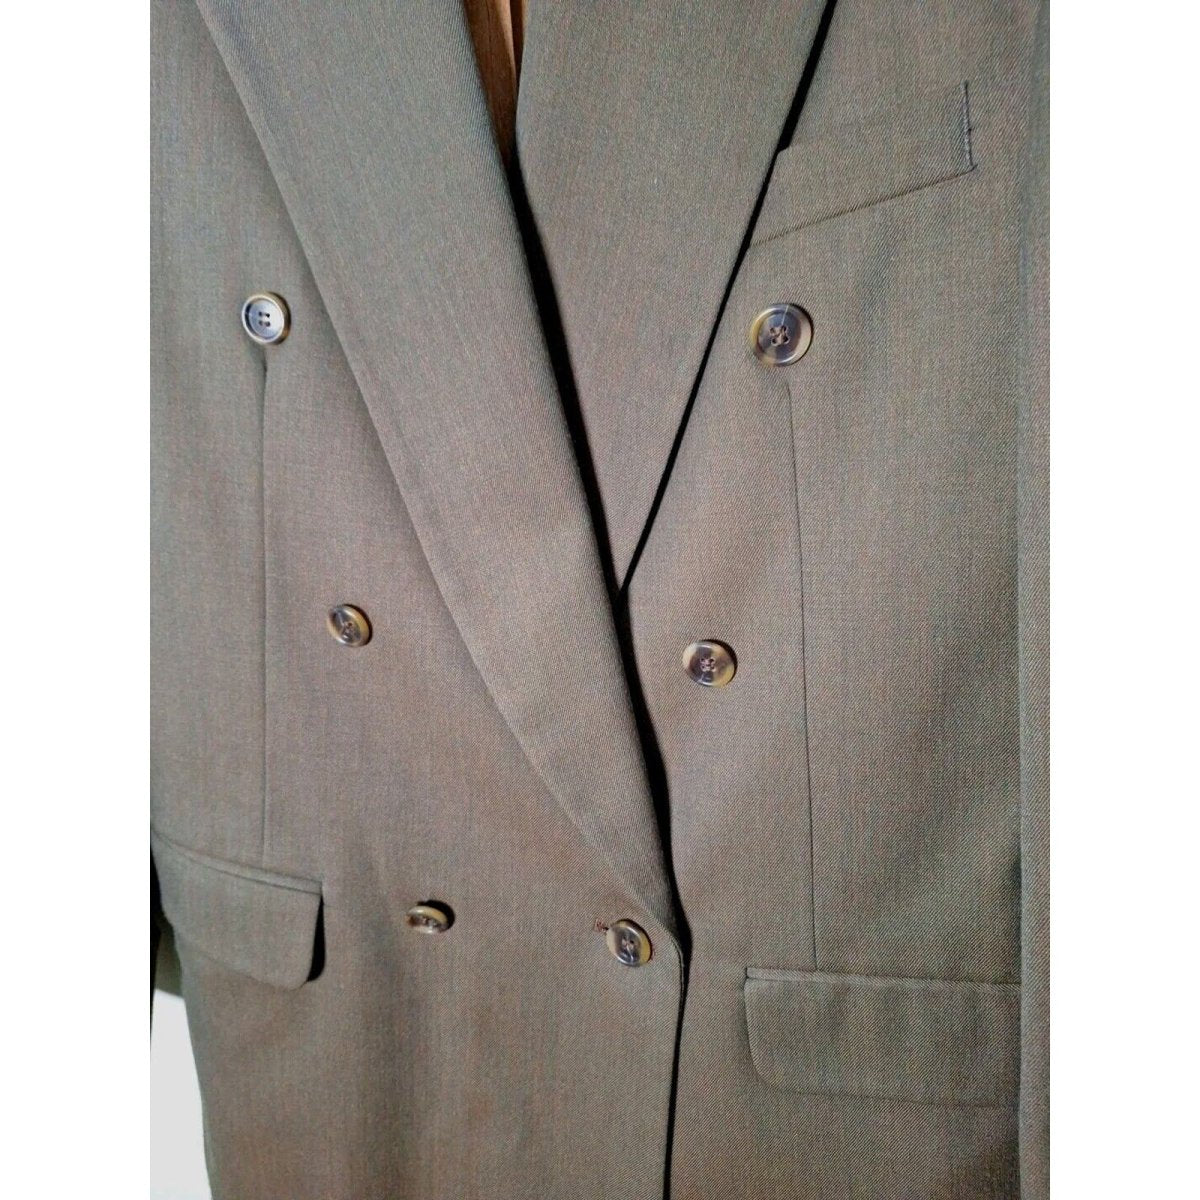 Vintage Olive Green Peak Lapel Double Breasted Blazer Jacket Men Size 39R - 40R - themallvintage The Mall Vintage